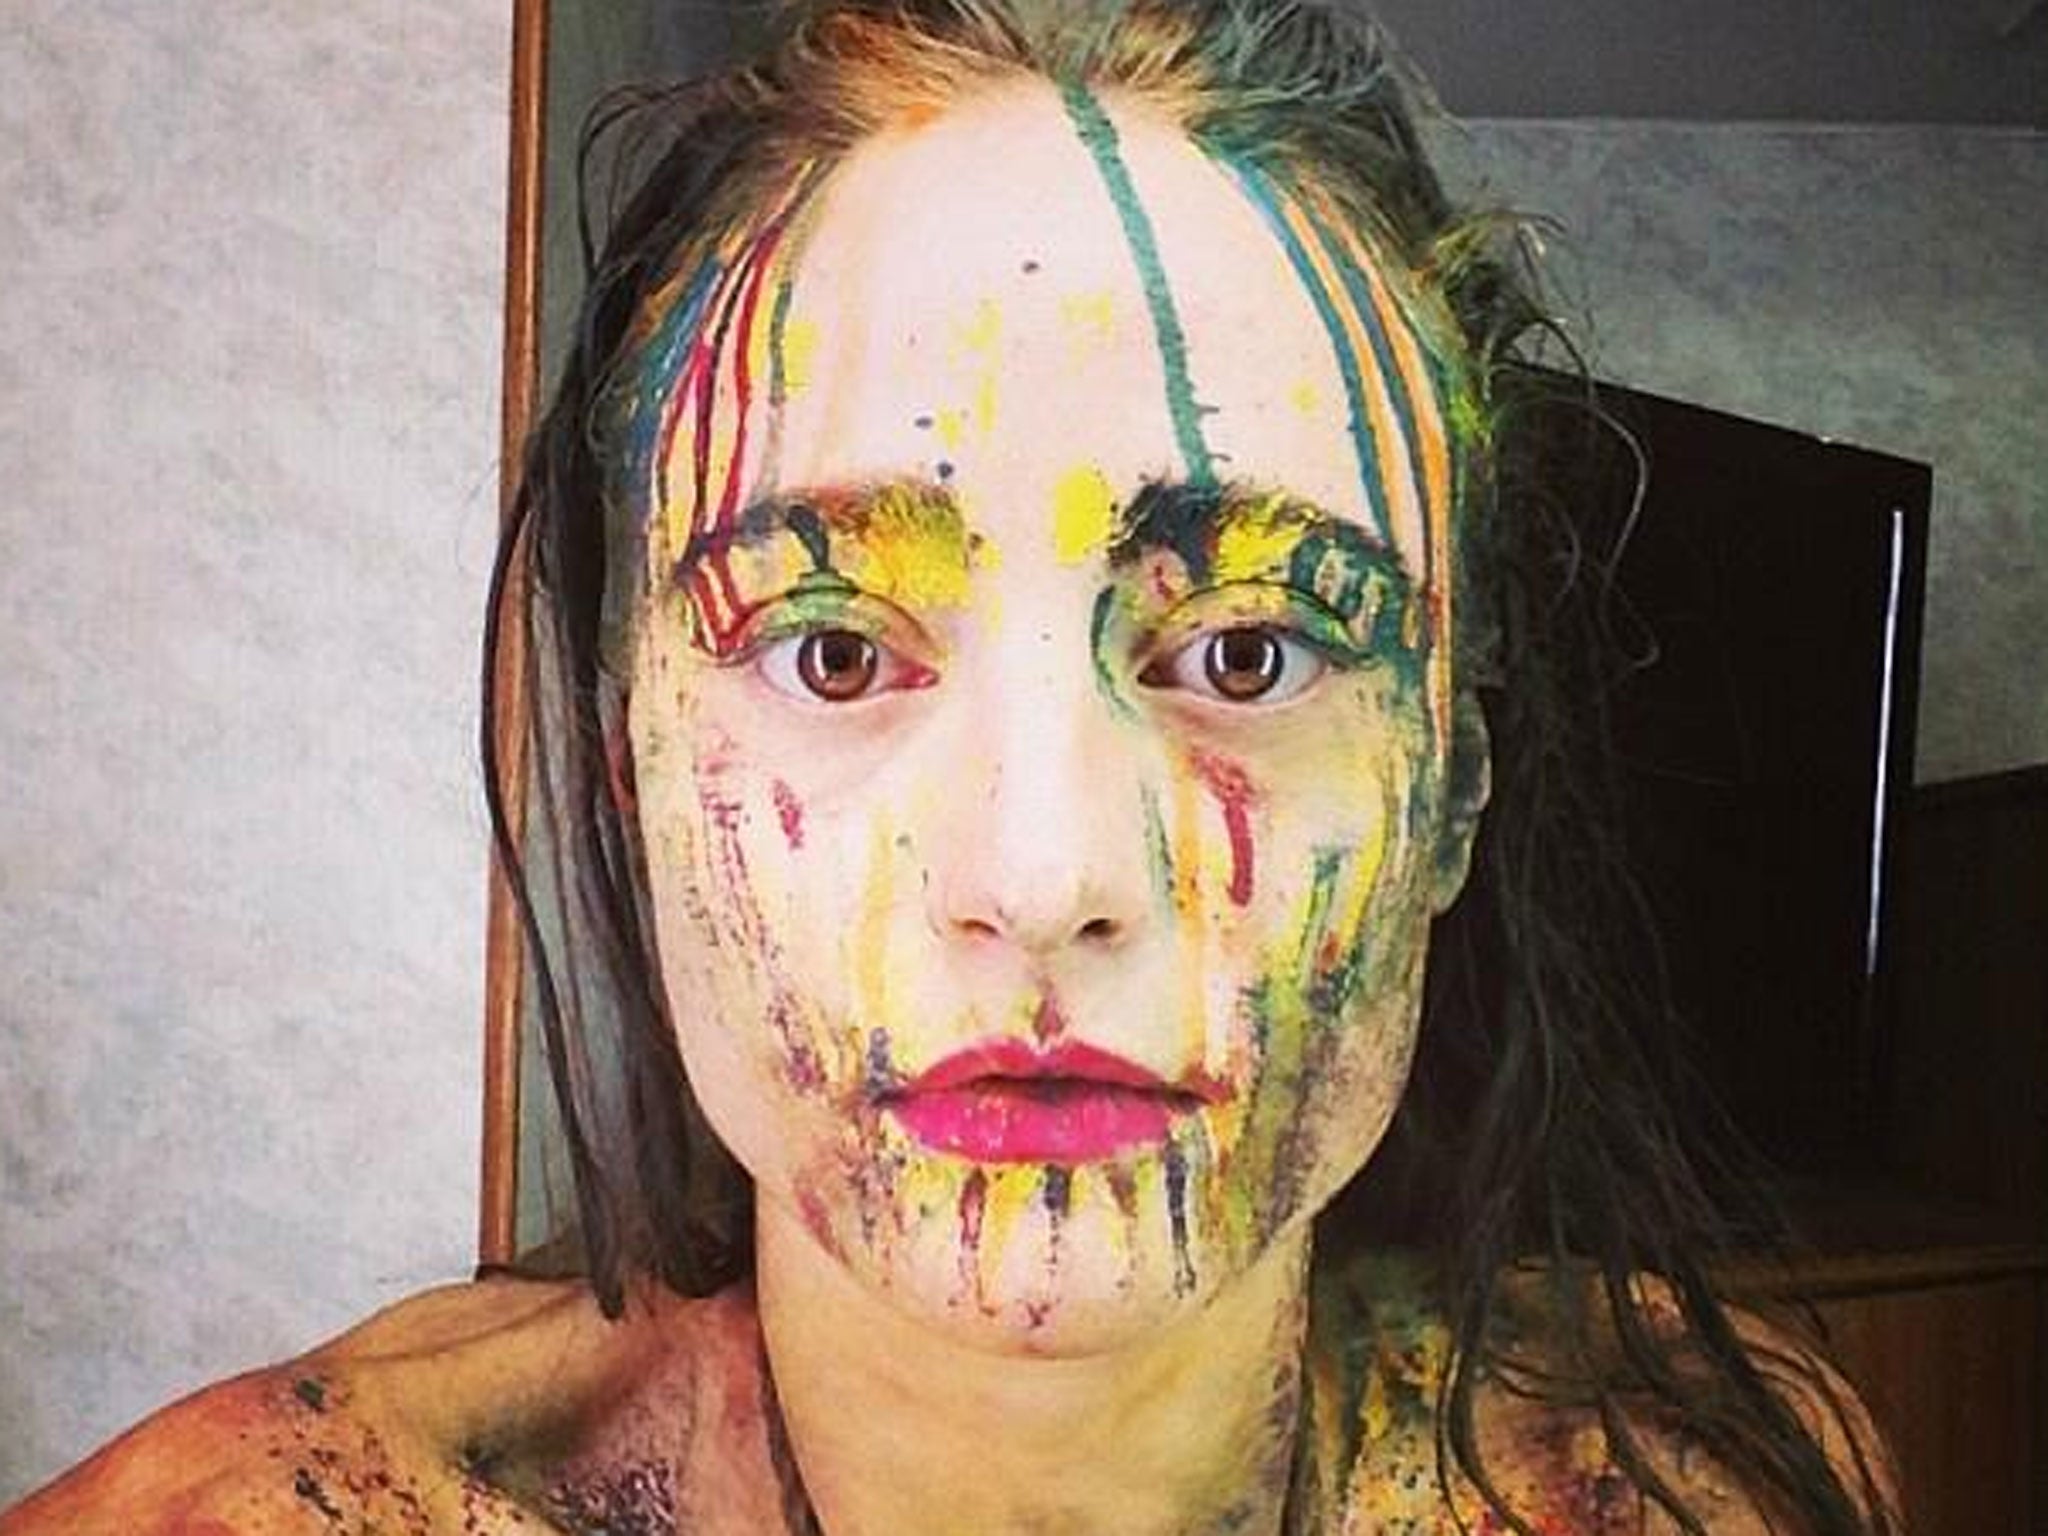 Performance artist Millie Brown has voiced her belief in 'absolute freedom of expression' after she vomited on Lady Gaga at SXSW